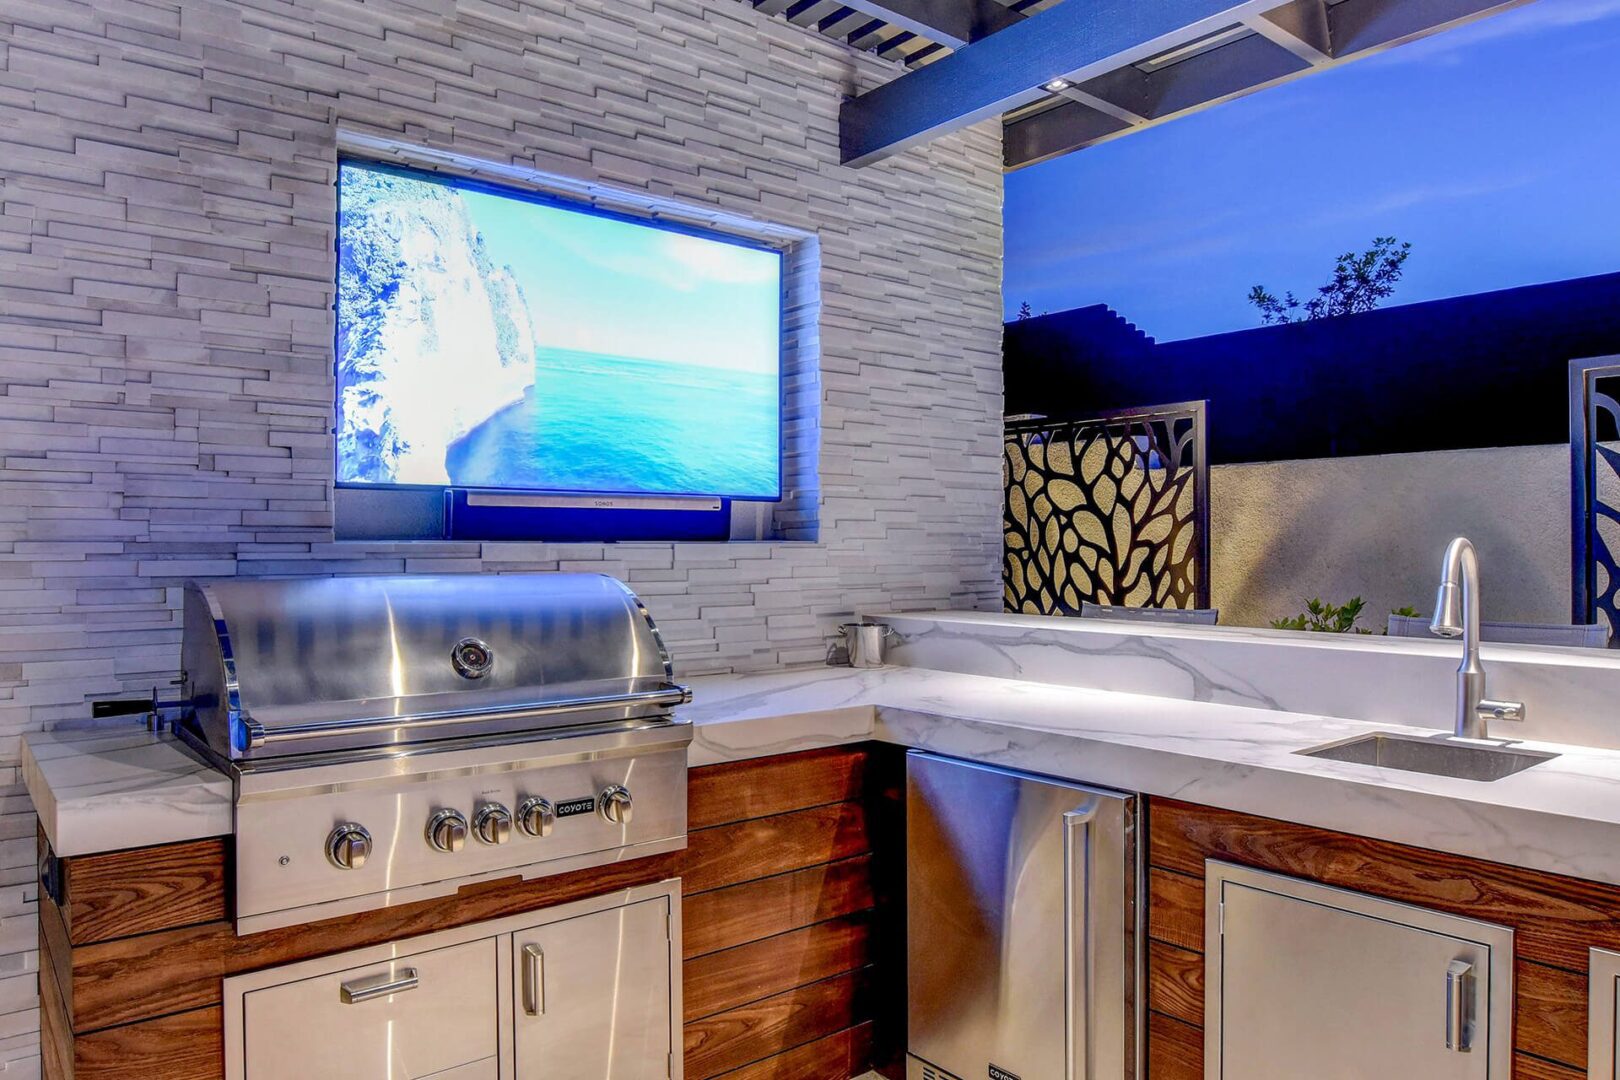 Thermory T&G Ash Cladding used to finish the outdoor kitchen cabinetry, paired with stacked stone finished media wall with recessed TV area